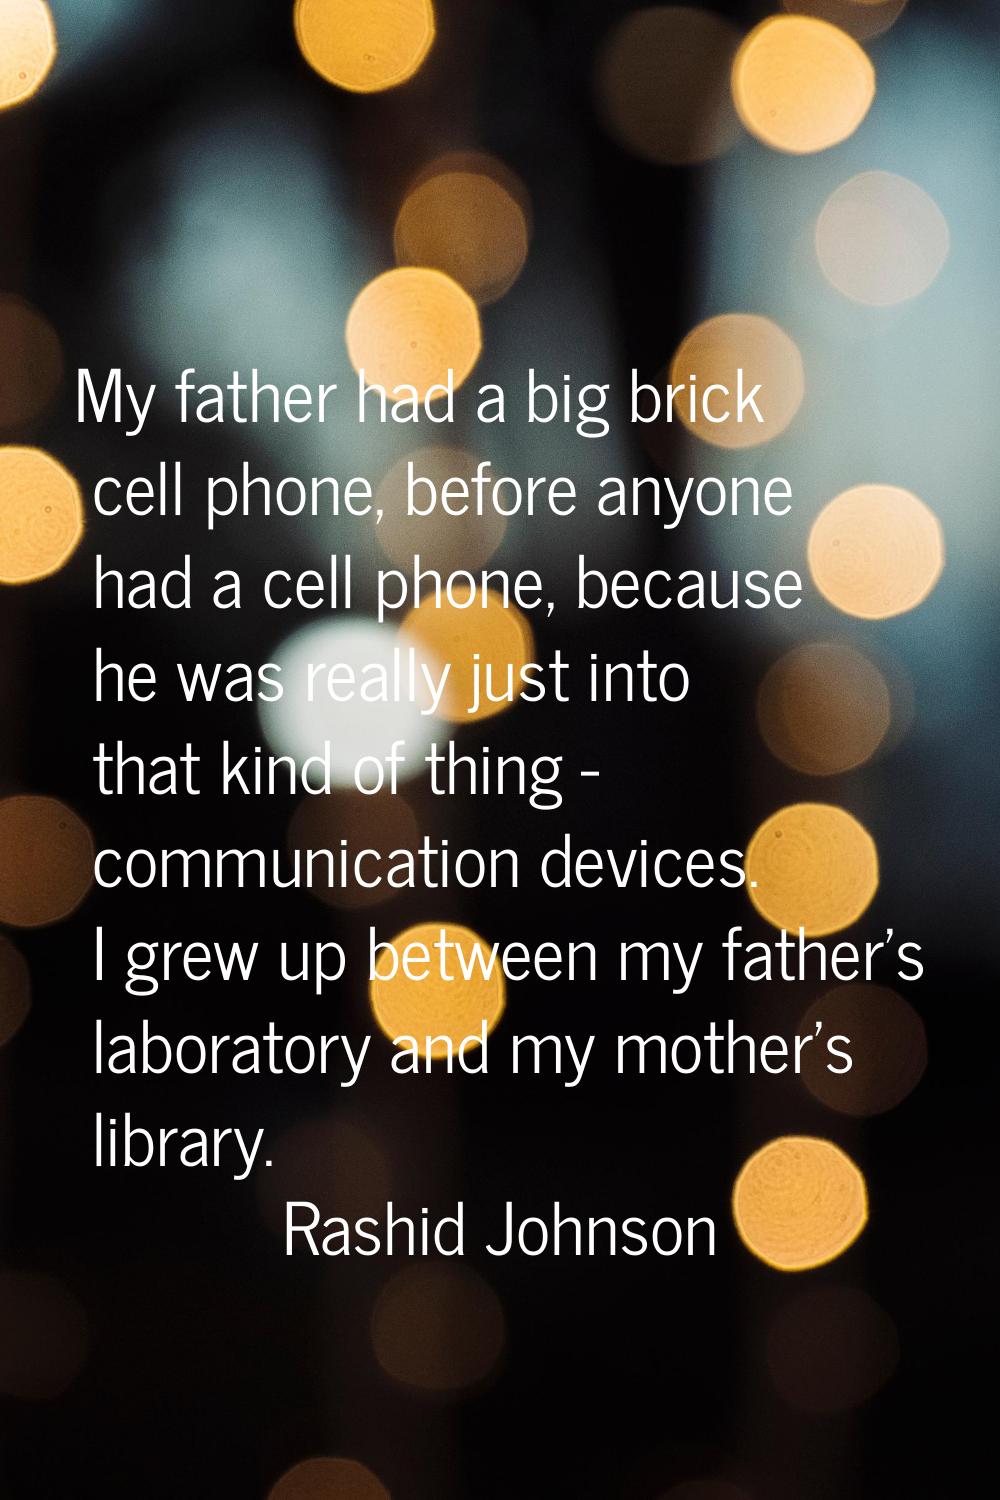 My father had a big brick cell phone, before anyone had a cell phone, because he was really just in